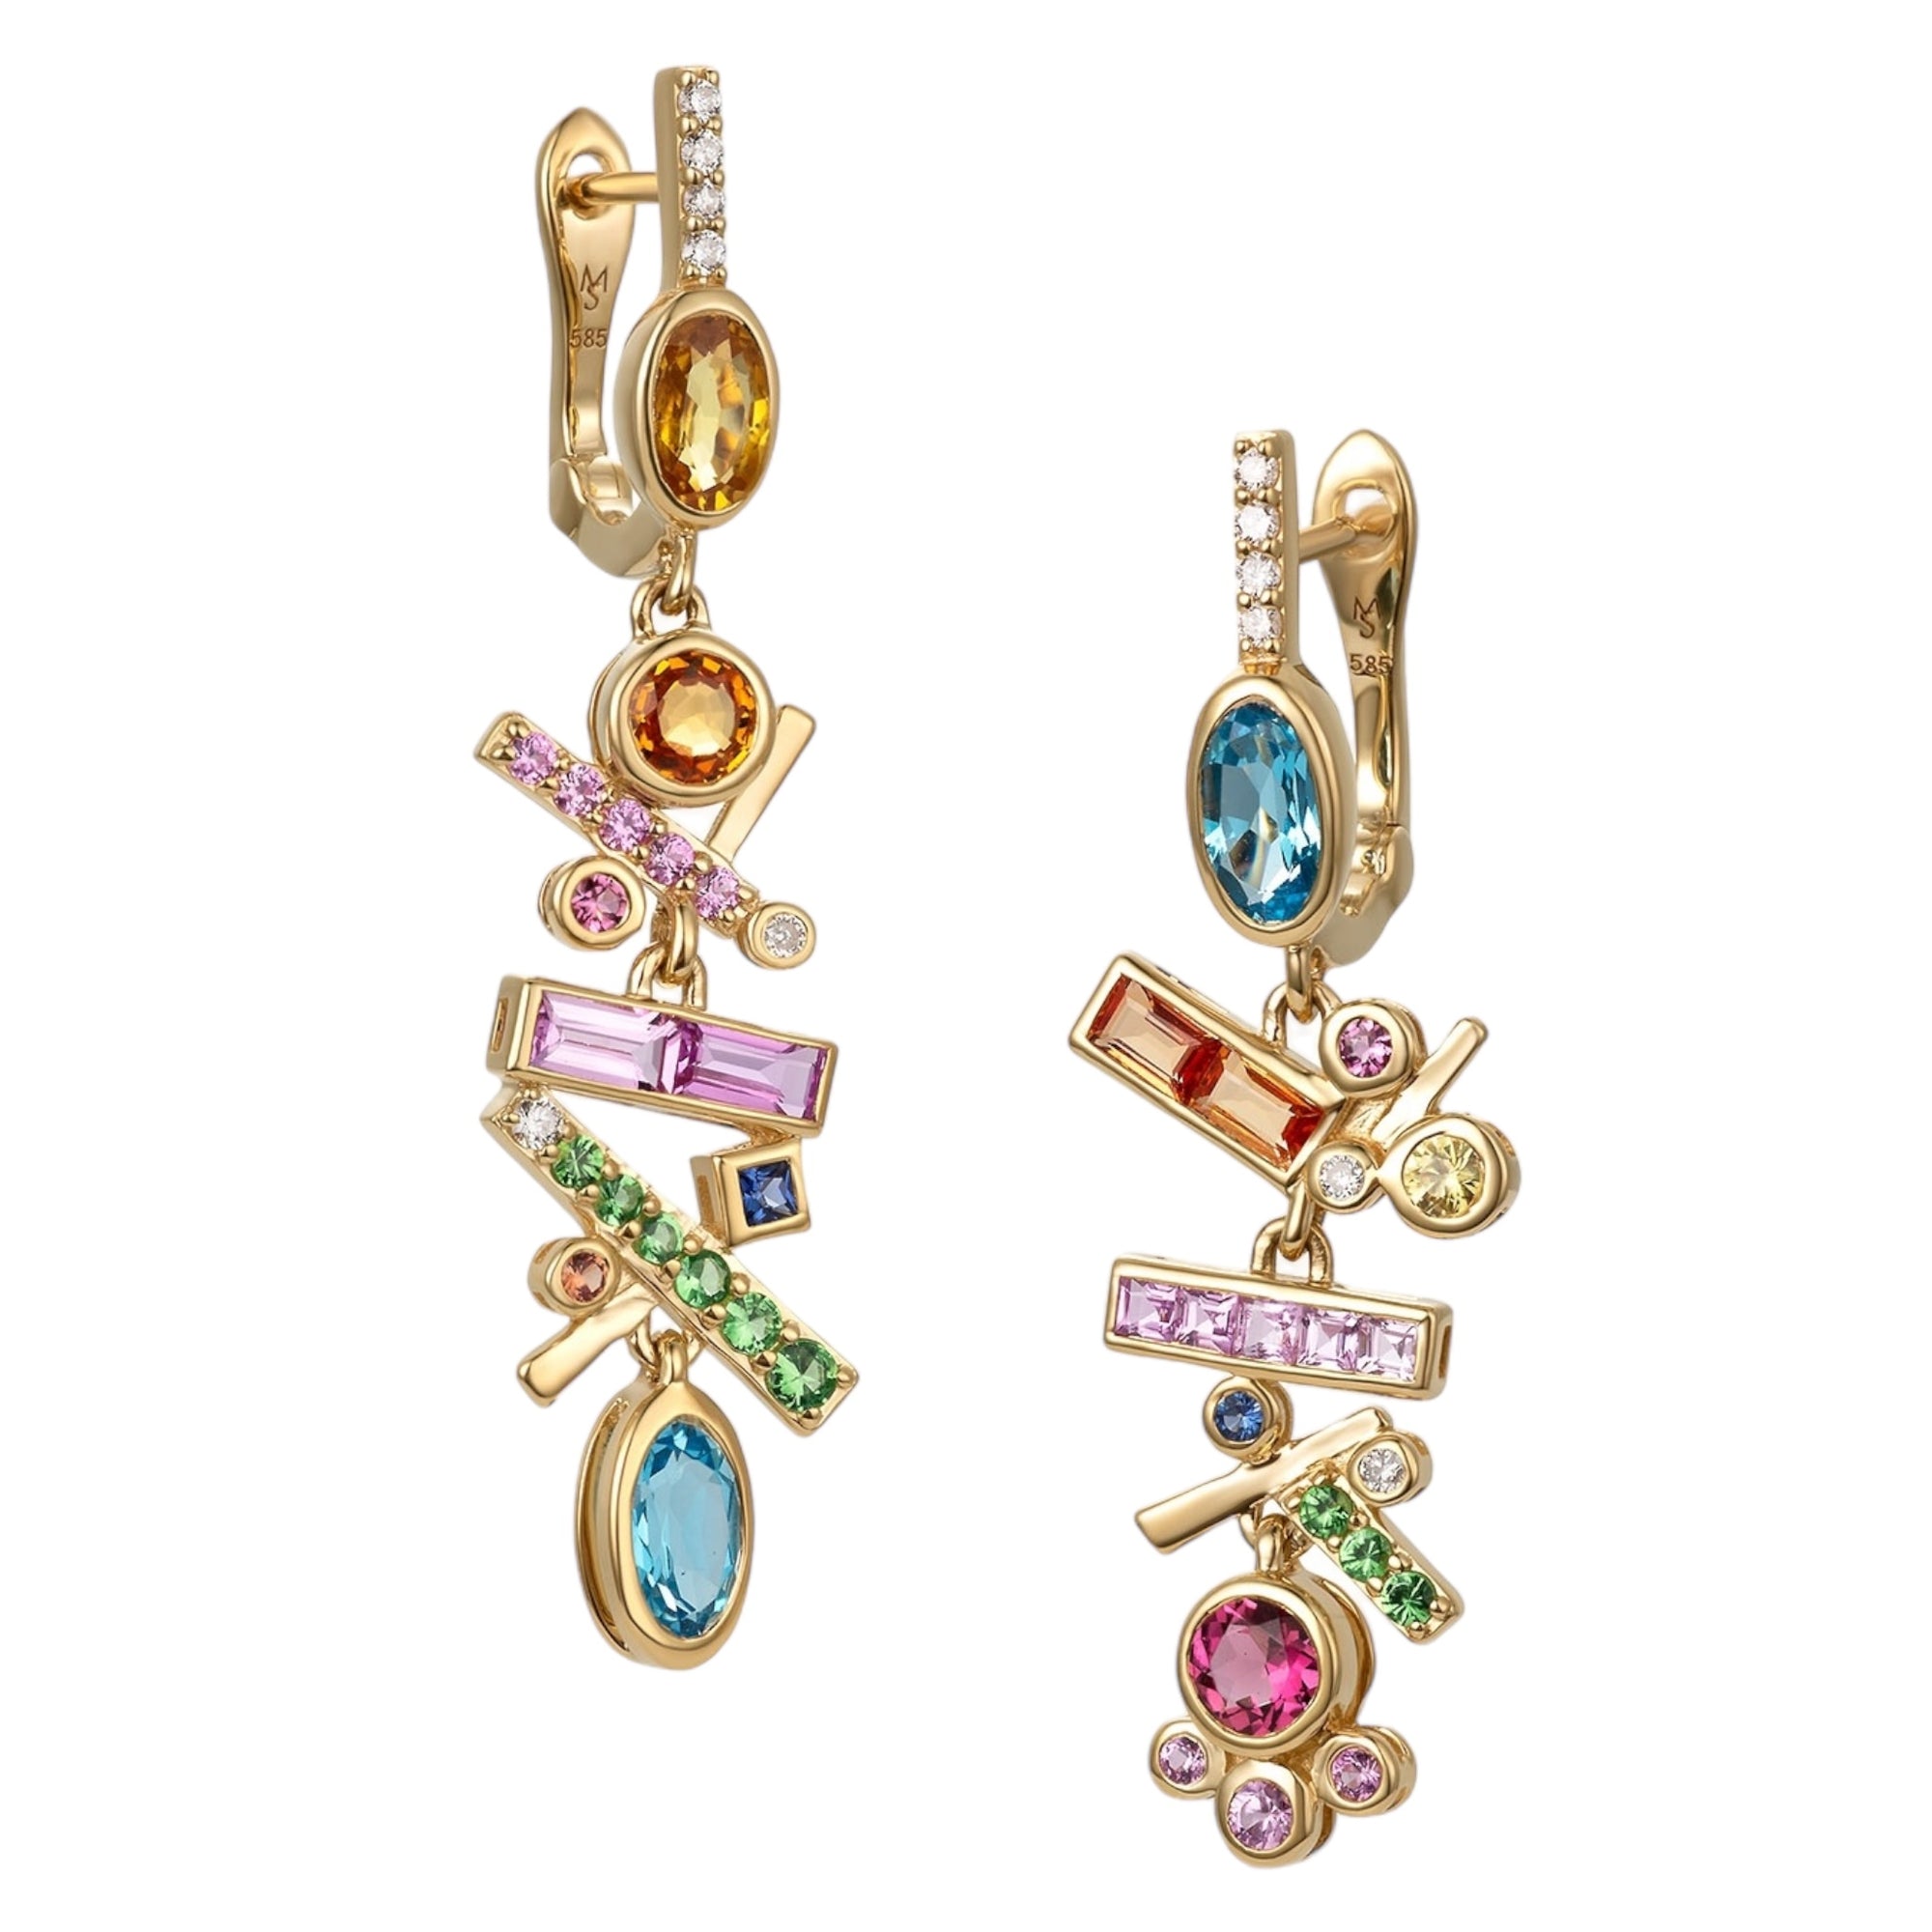 Falling Stars Multi-color Earrings by Martha Seely available at Talisman Collection Fine Jewelers in El Dorado Hills, CA and online. Stats: These lively earrings feature a vibrant cascade of precious gemstones including sapphires, tsavorites, blue topaz, and pink tourmalines, totaling 2.38 carats. Each gemstone is carefully selected, flawlessly set, and accented with 0.08 carats of sparkling diamonds, making these earrings a truly captivating beauties. 